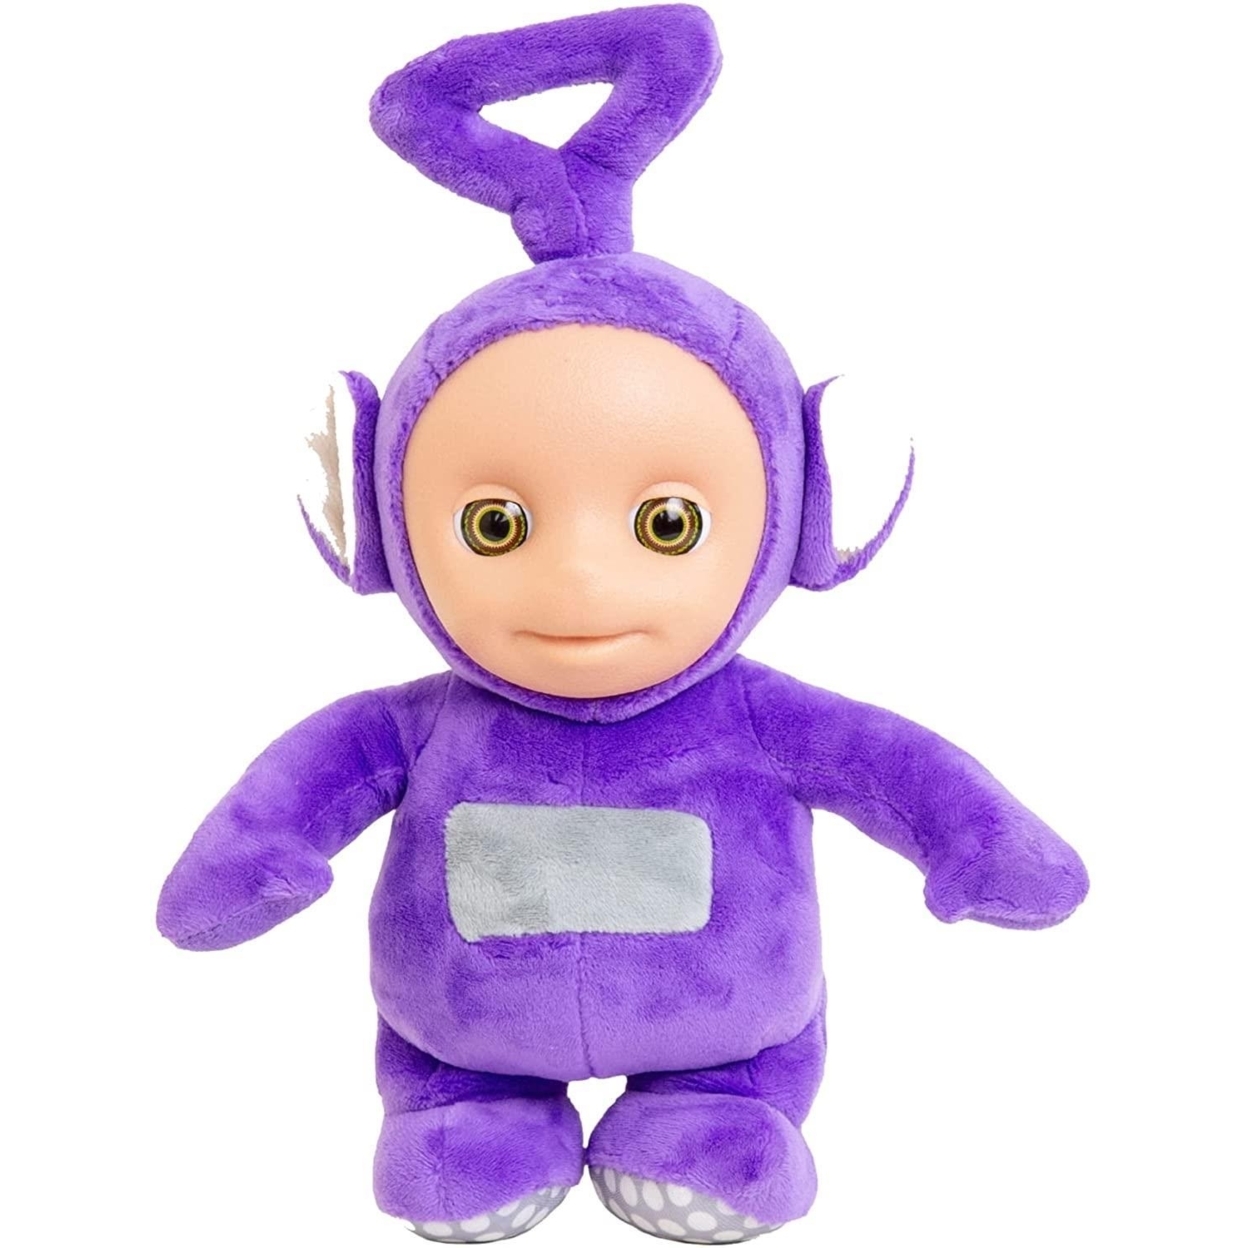 Teletubbies Talking Tinky Winky Purple Plush 11" Doll Giggles Teletubby Toy Mighty Mojo - image 2 of 6